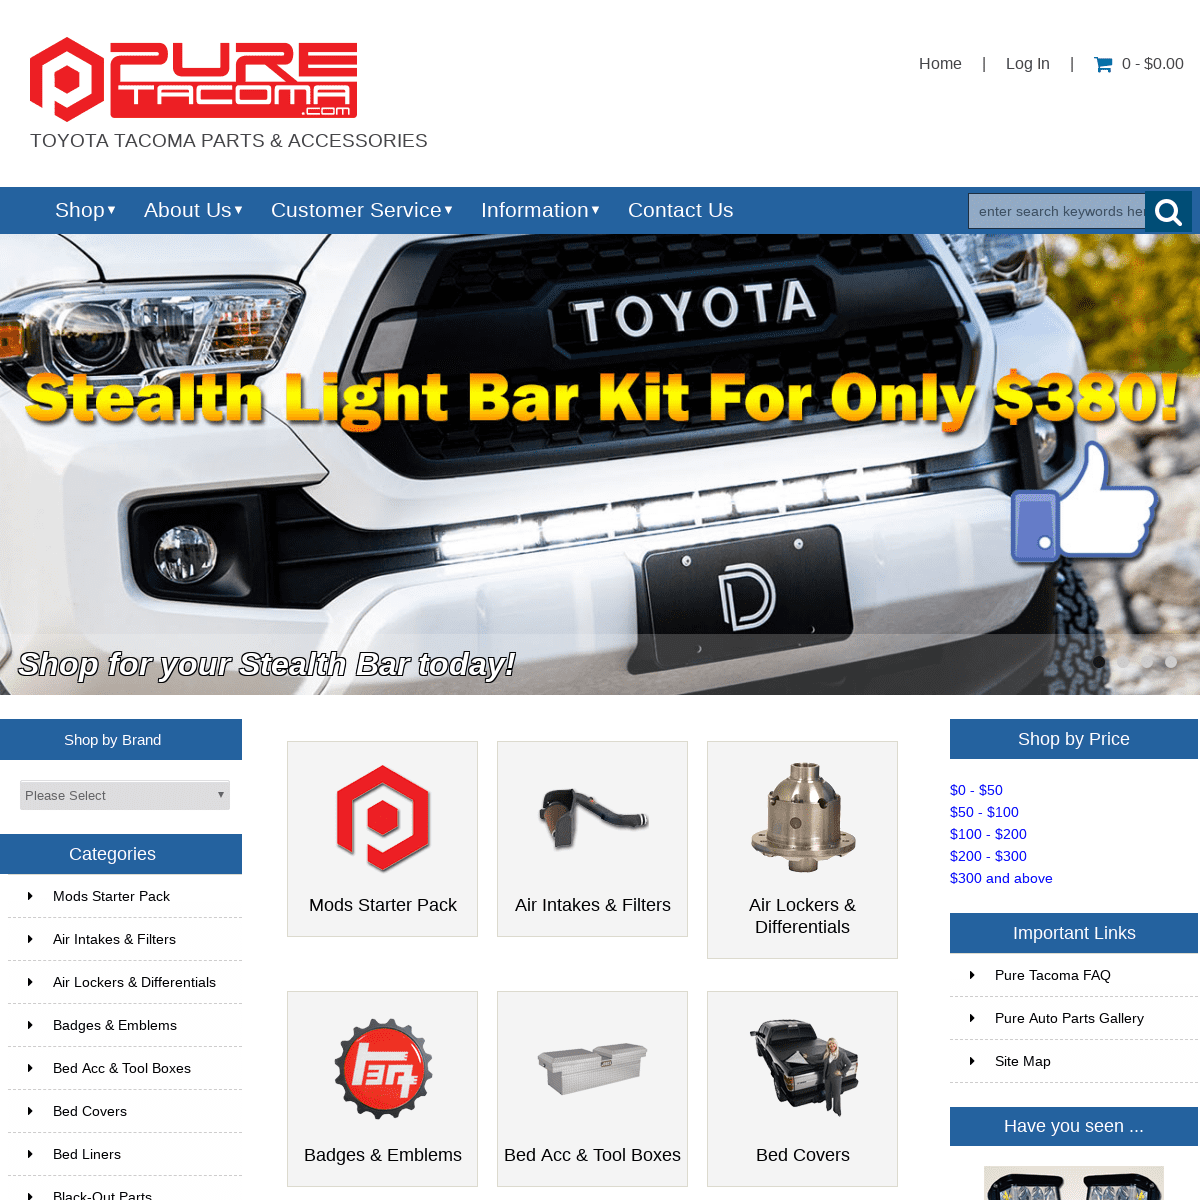 Pure Tacoma, Parts and Accessories for your Toyota Tacoma